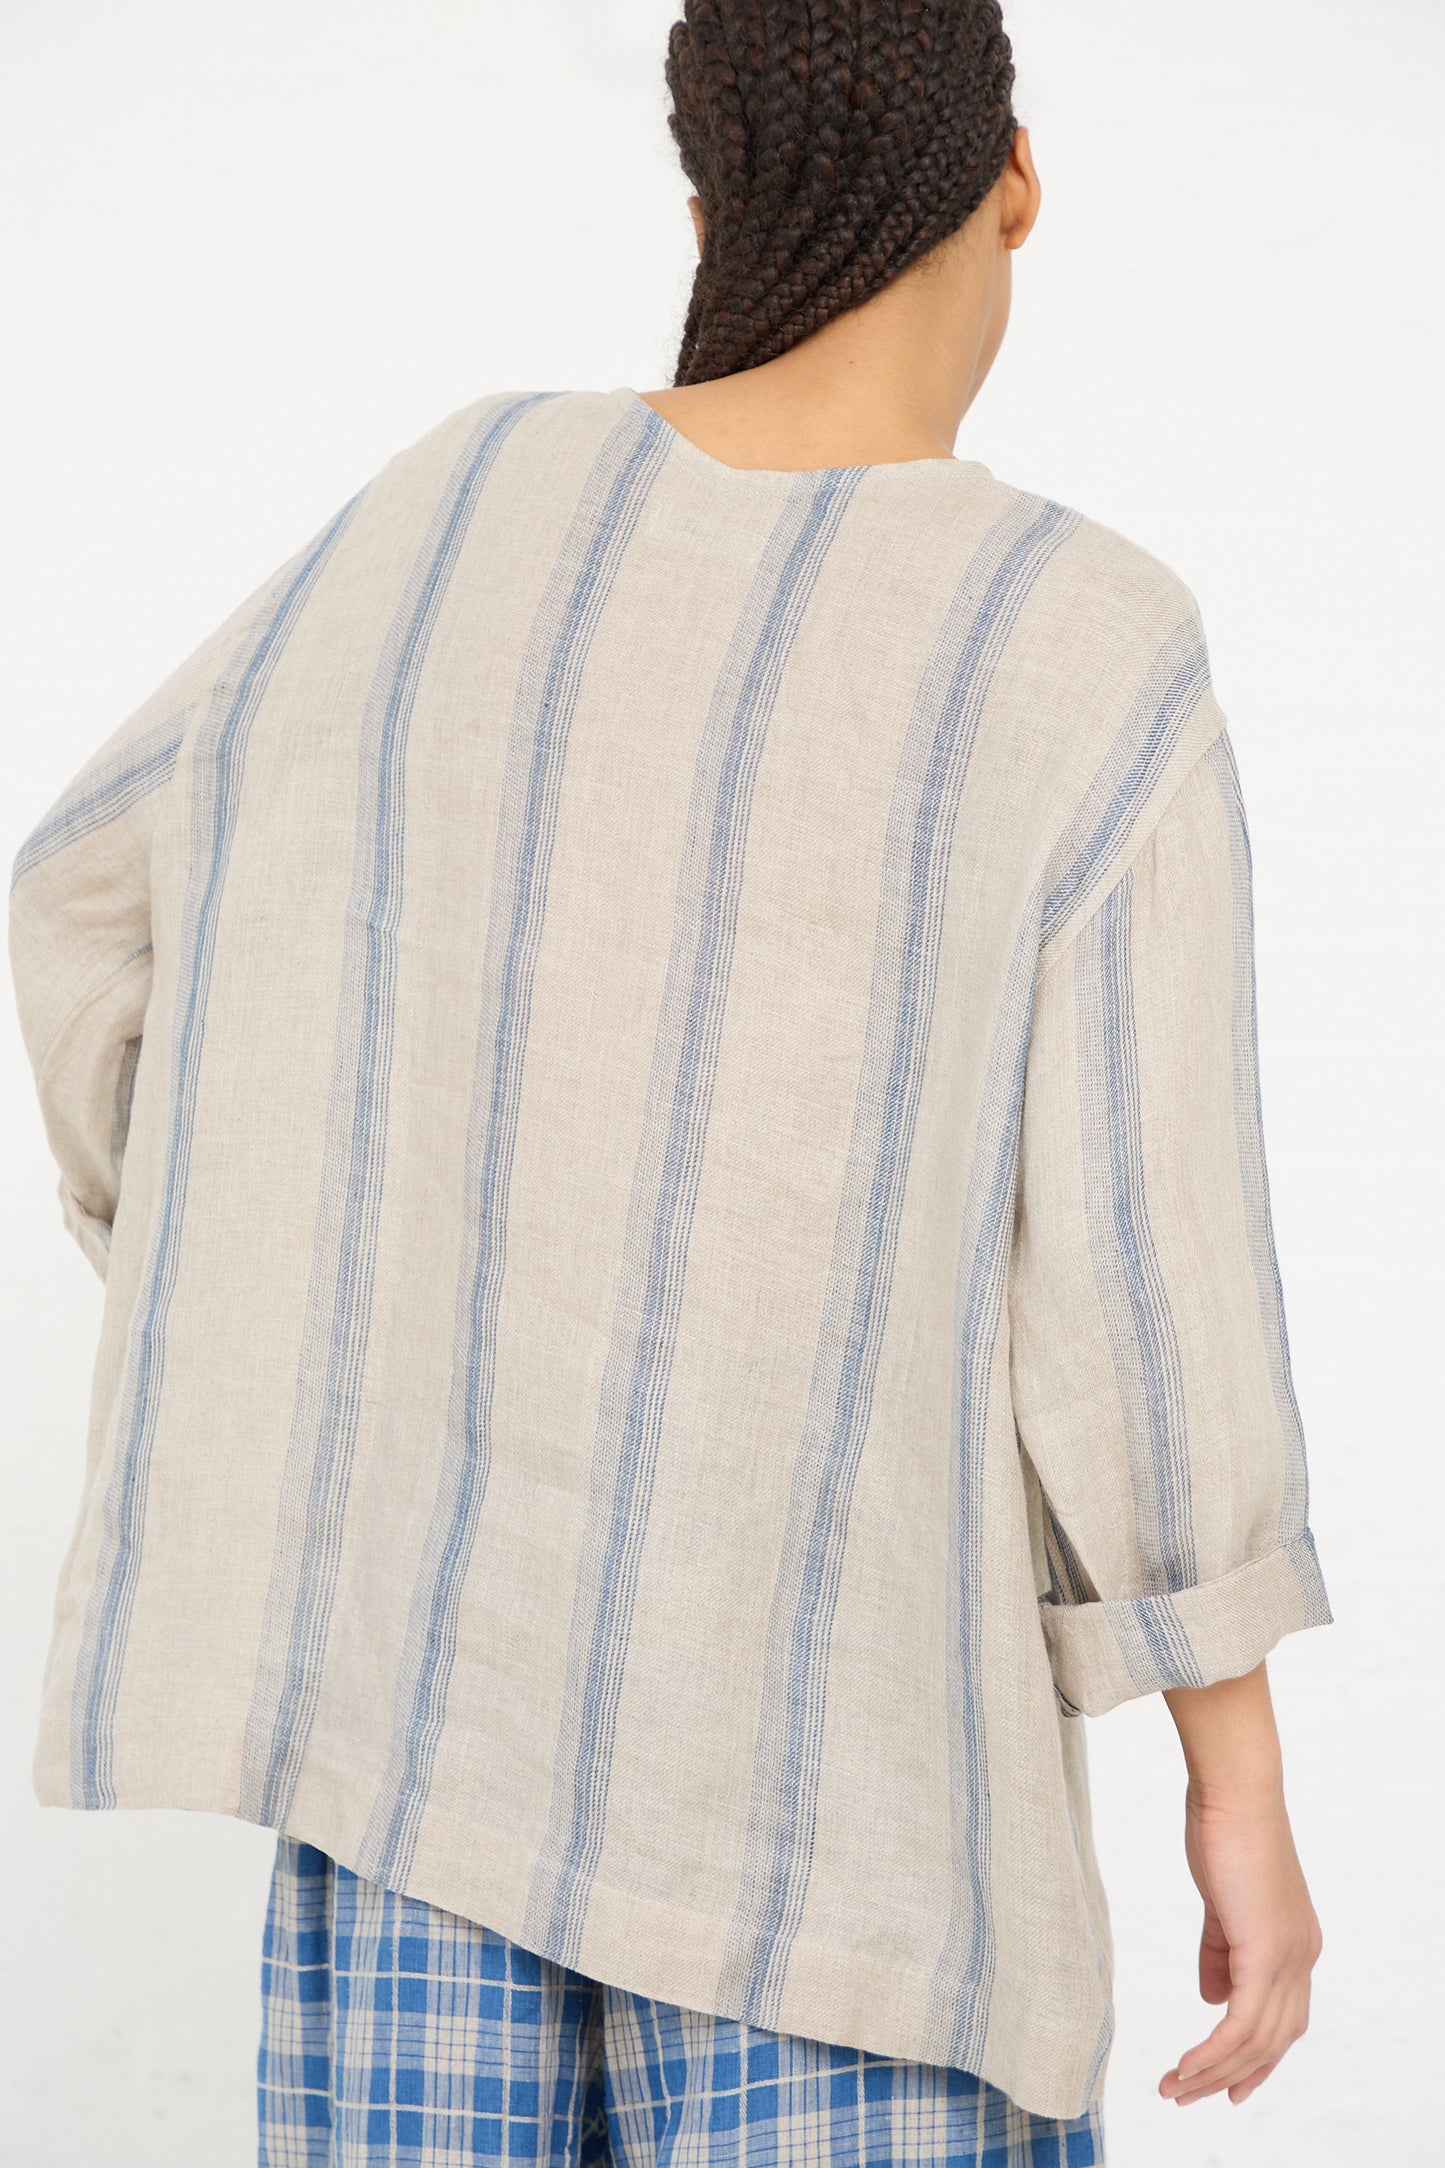 A person seen from the back wearing an Ichi Antiquités Linen Stripe Pullover in Natural and Indigo with rolled-up sleeves.